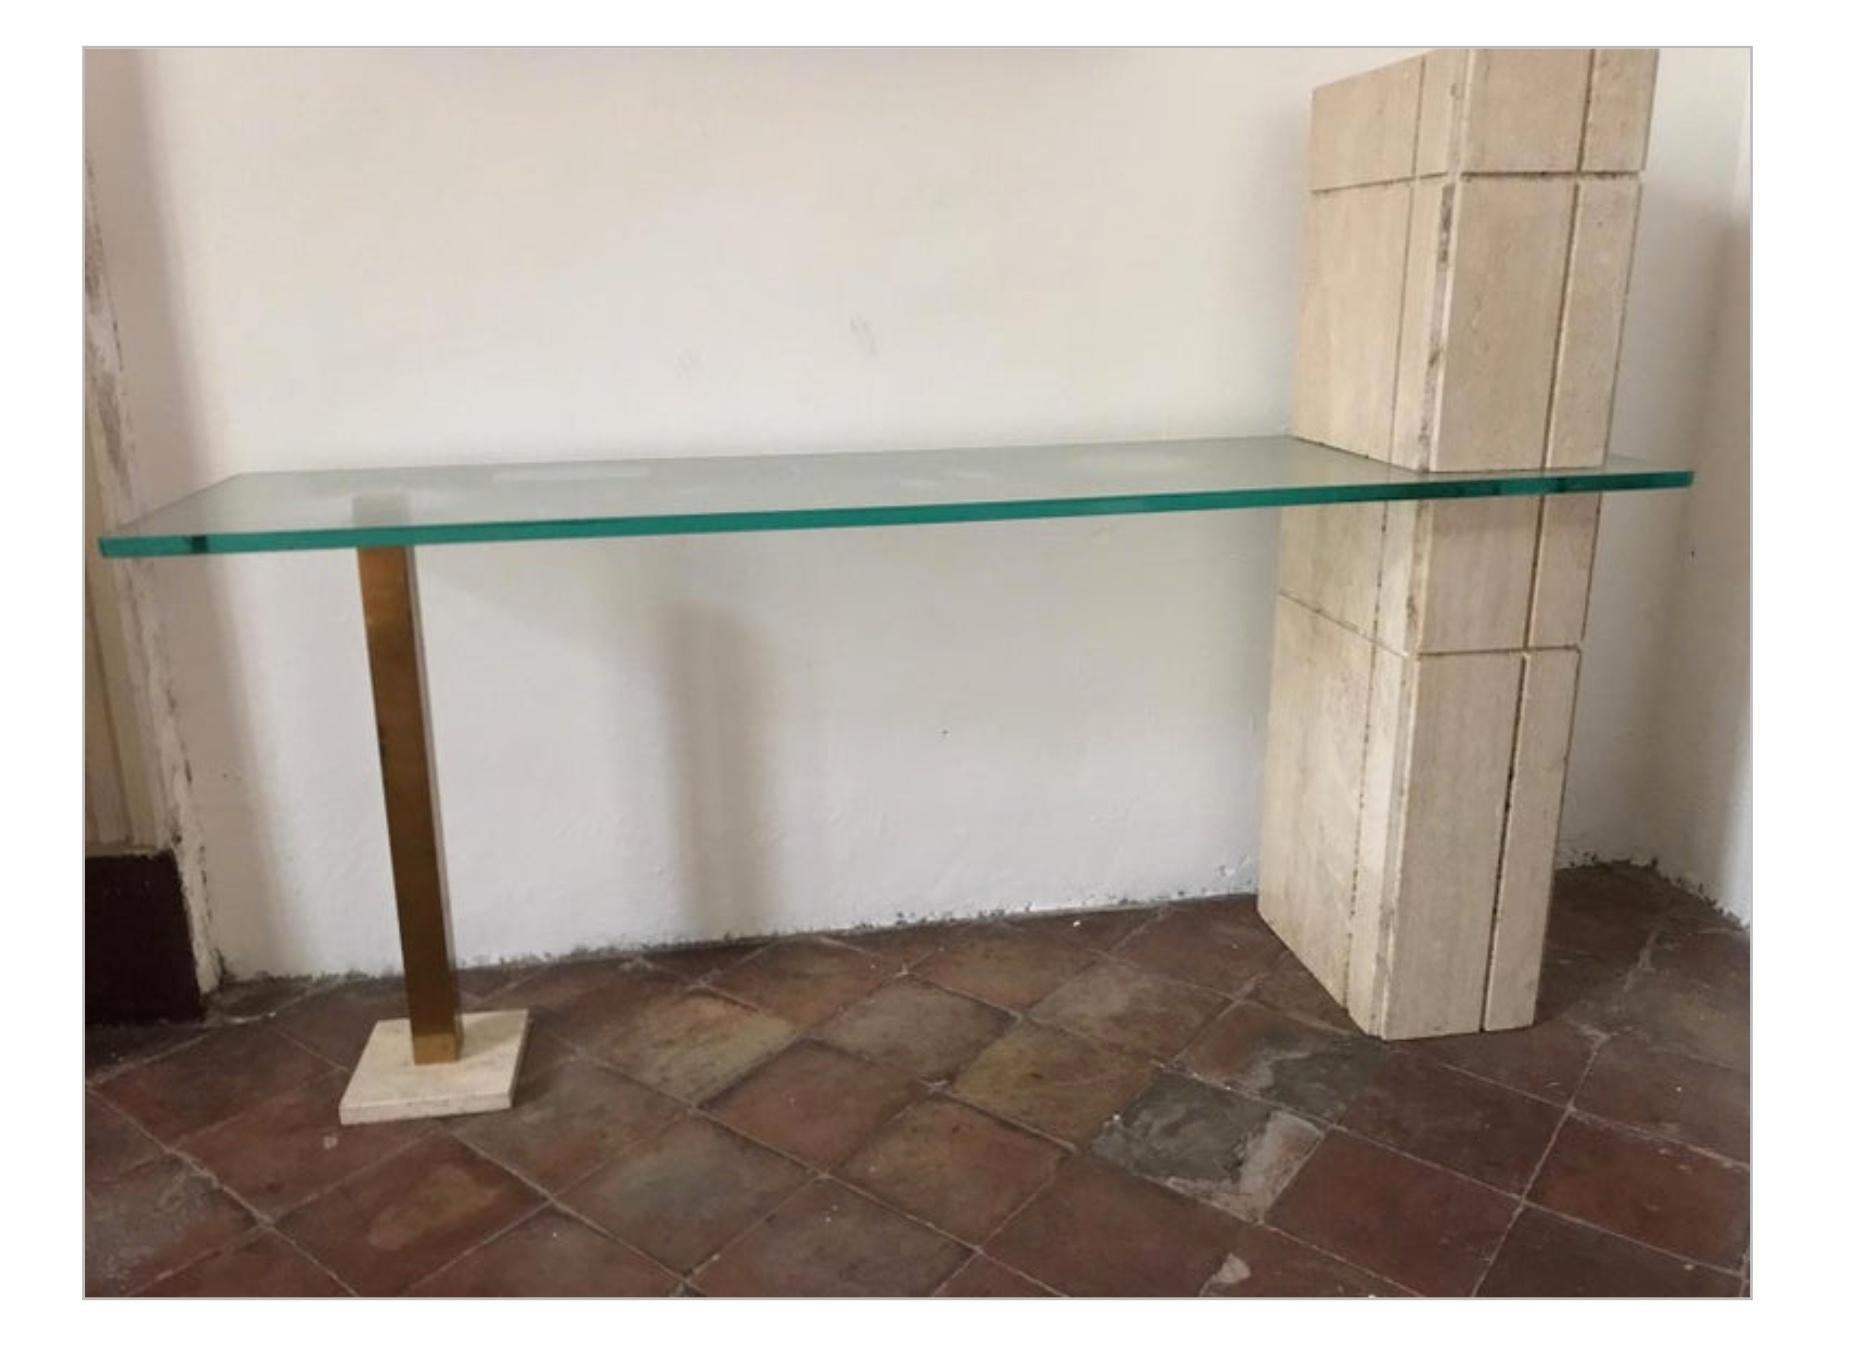 Sculpture console table with travertine and brass pedestals and rectangular glass top

Travertine pedestal cm 92 H.